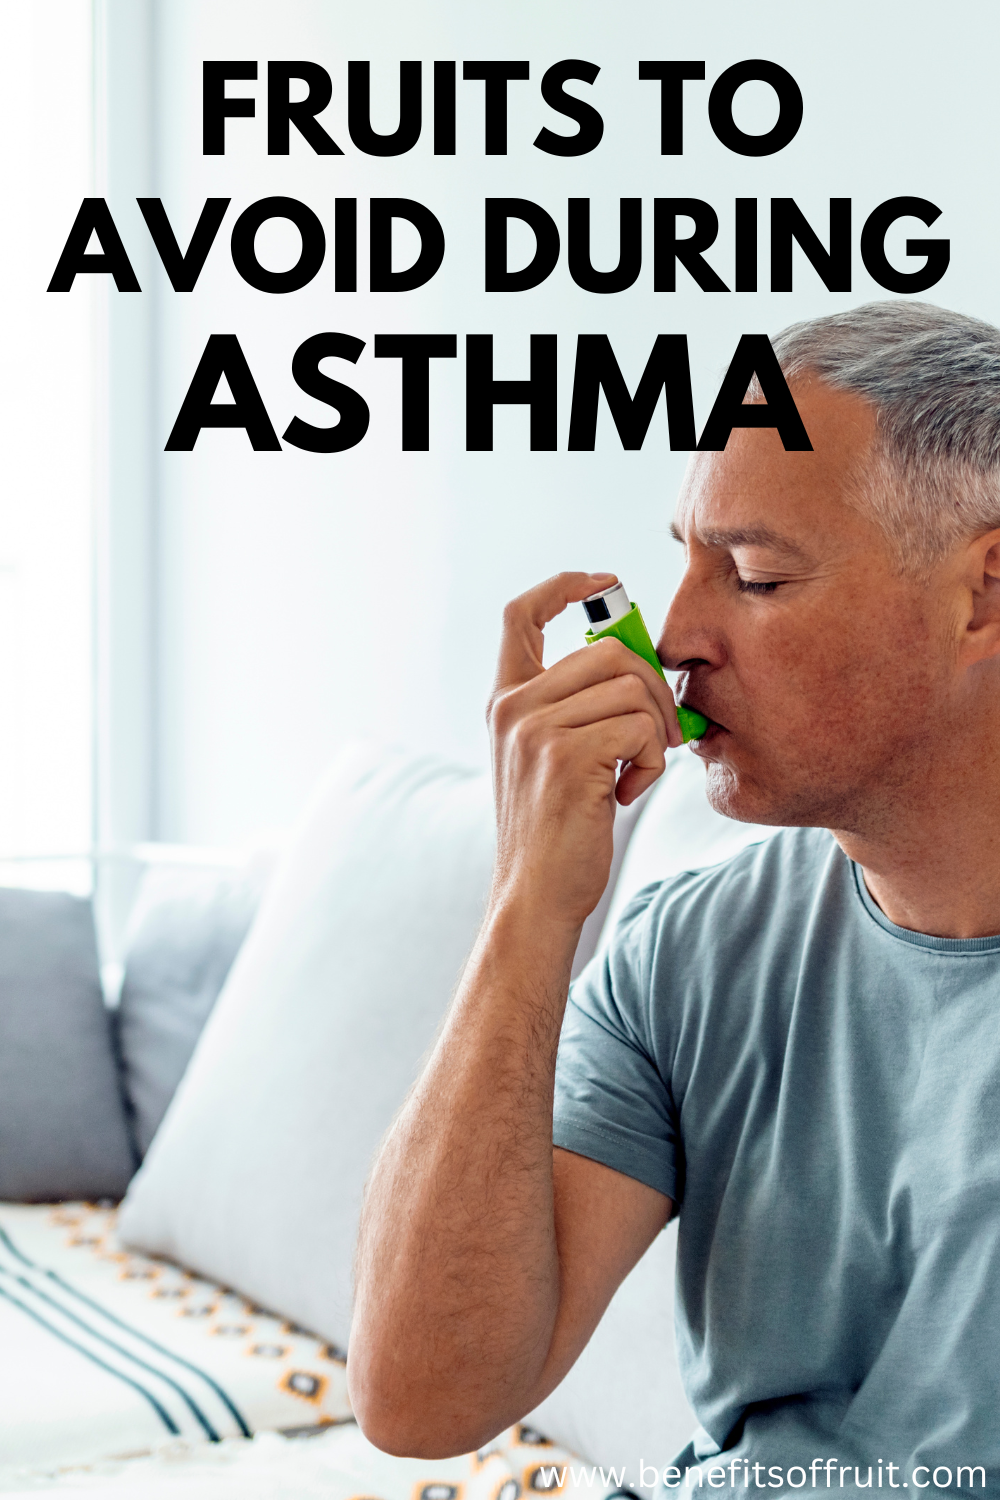 Fruits To Avoid During Asthma